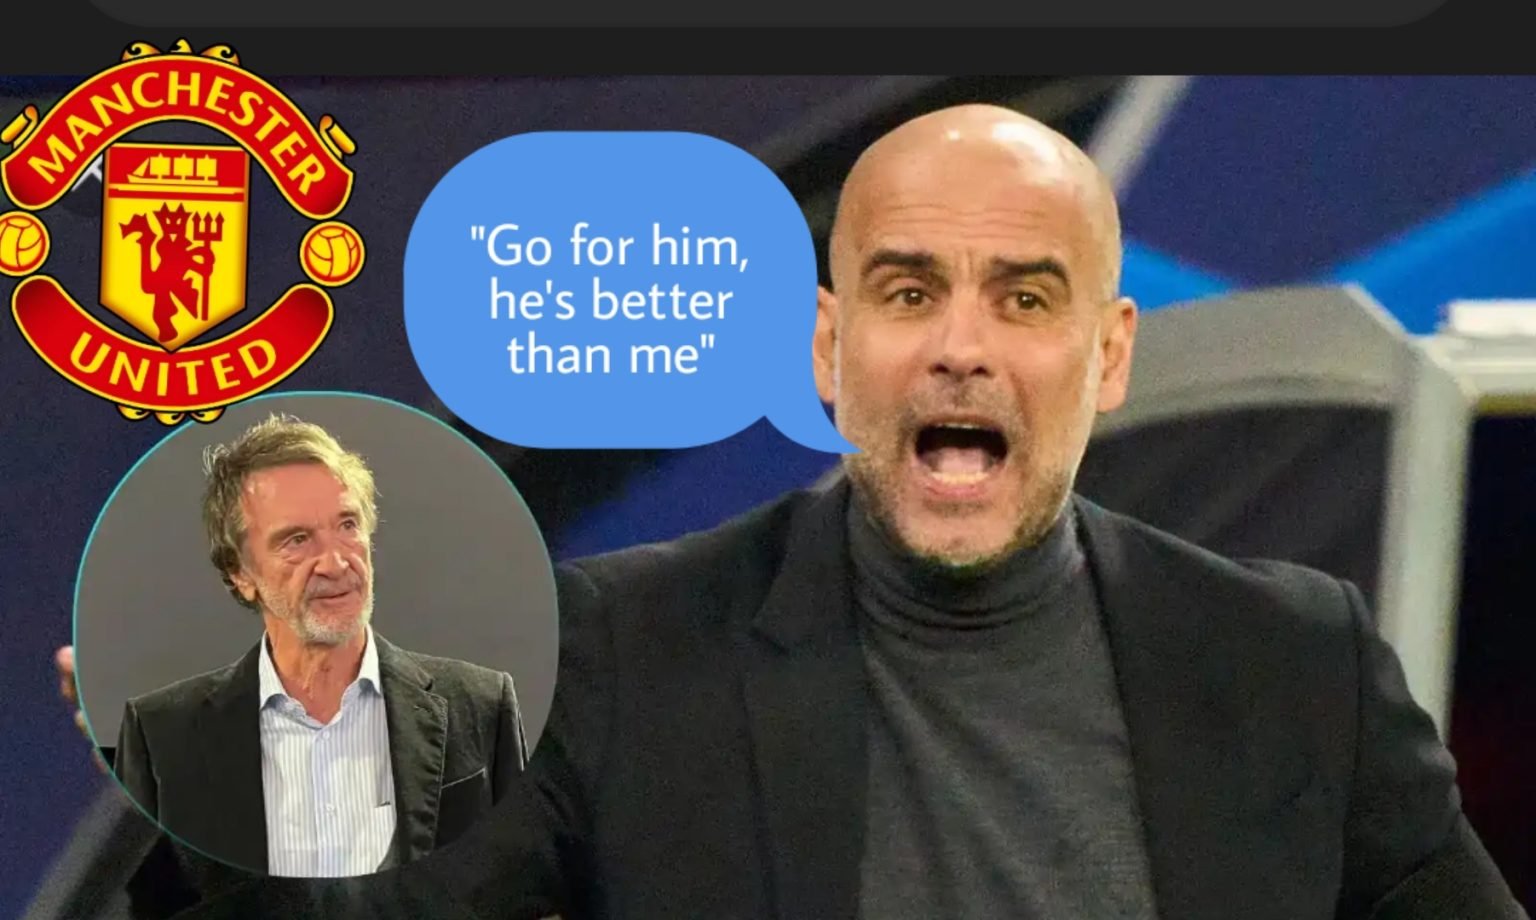 Sincerely, I believe he is superior. Erik ten Hag will be replaced by the Manager at Man United. It's better, according to Pep Guardiola.